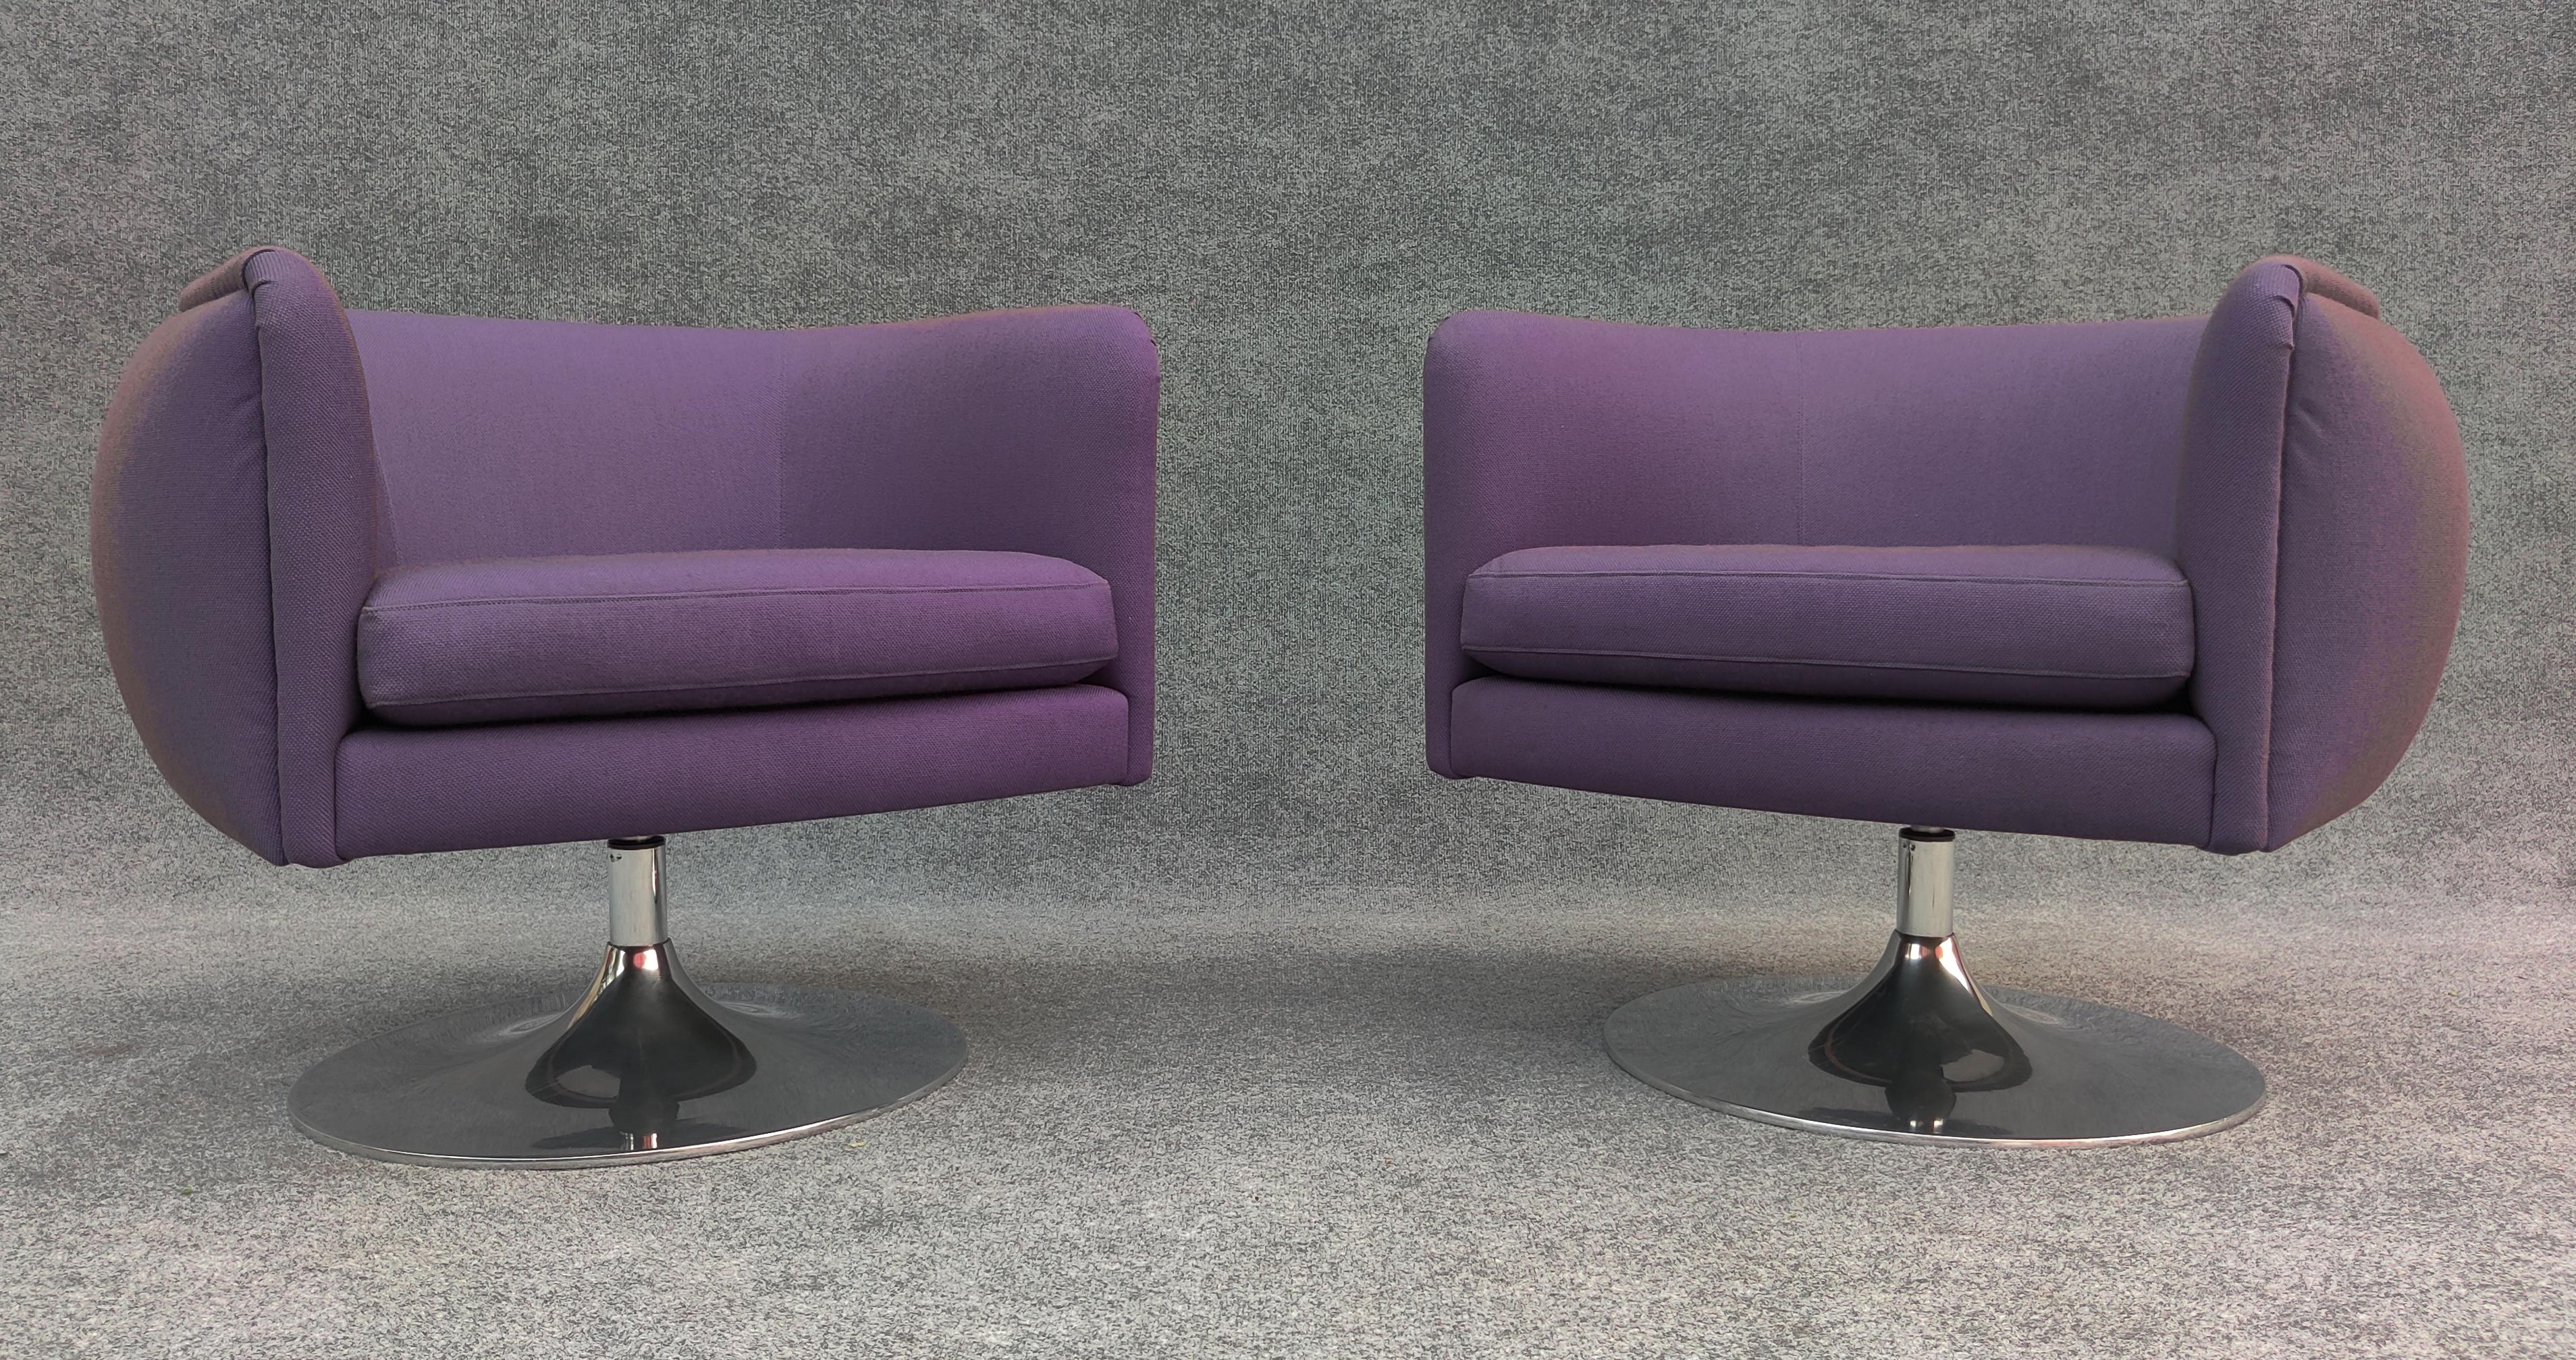 One of Joe D'Urso's most iconic designs, this pair of chairs was produced in 2008 by Knoll. This pair forgoes the height adjustmeant feature in favor of the elegant 360 swivel feature, which returns the chair to its original orientation every time.